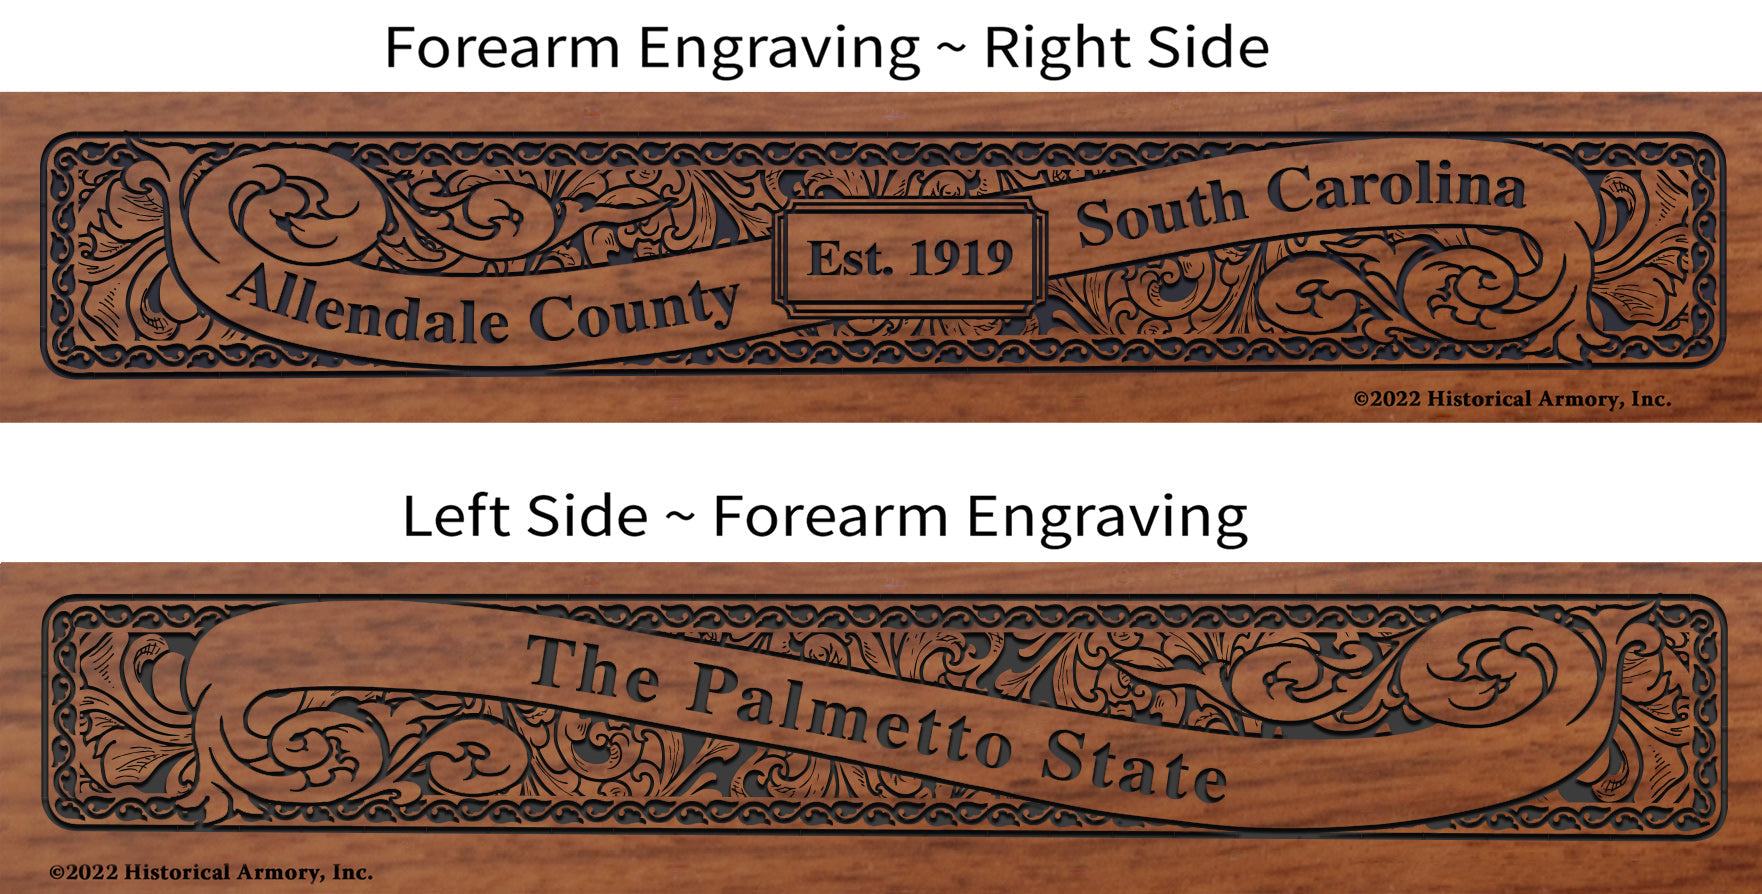 Allendale County South Carolina Engraved Rifle Forearm